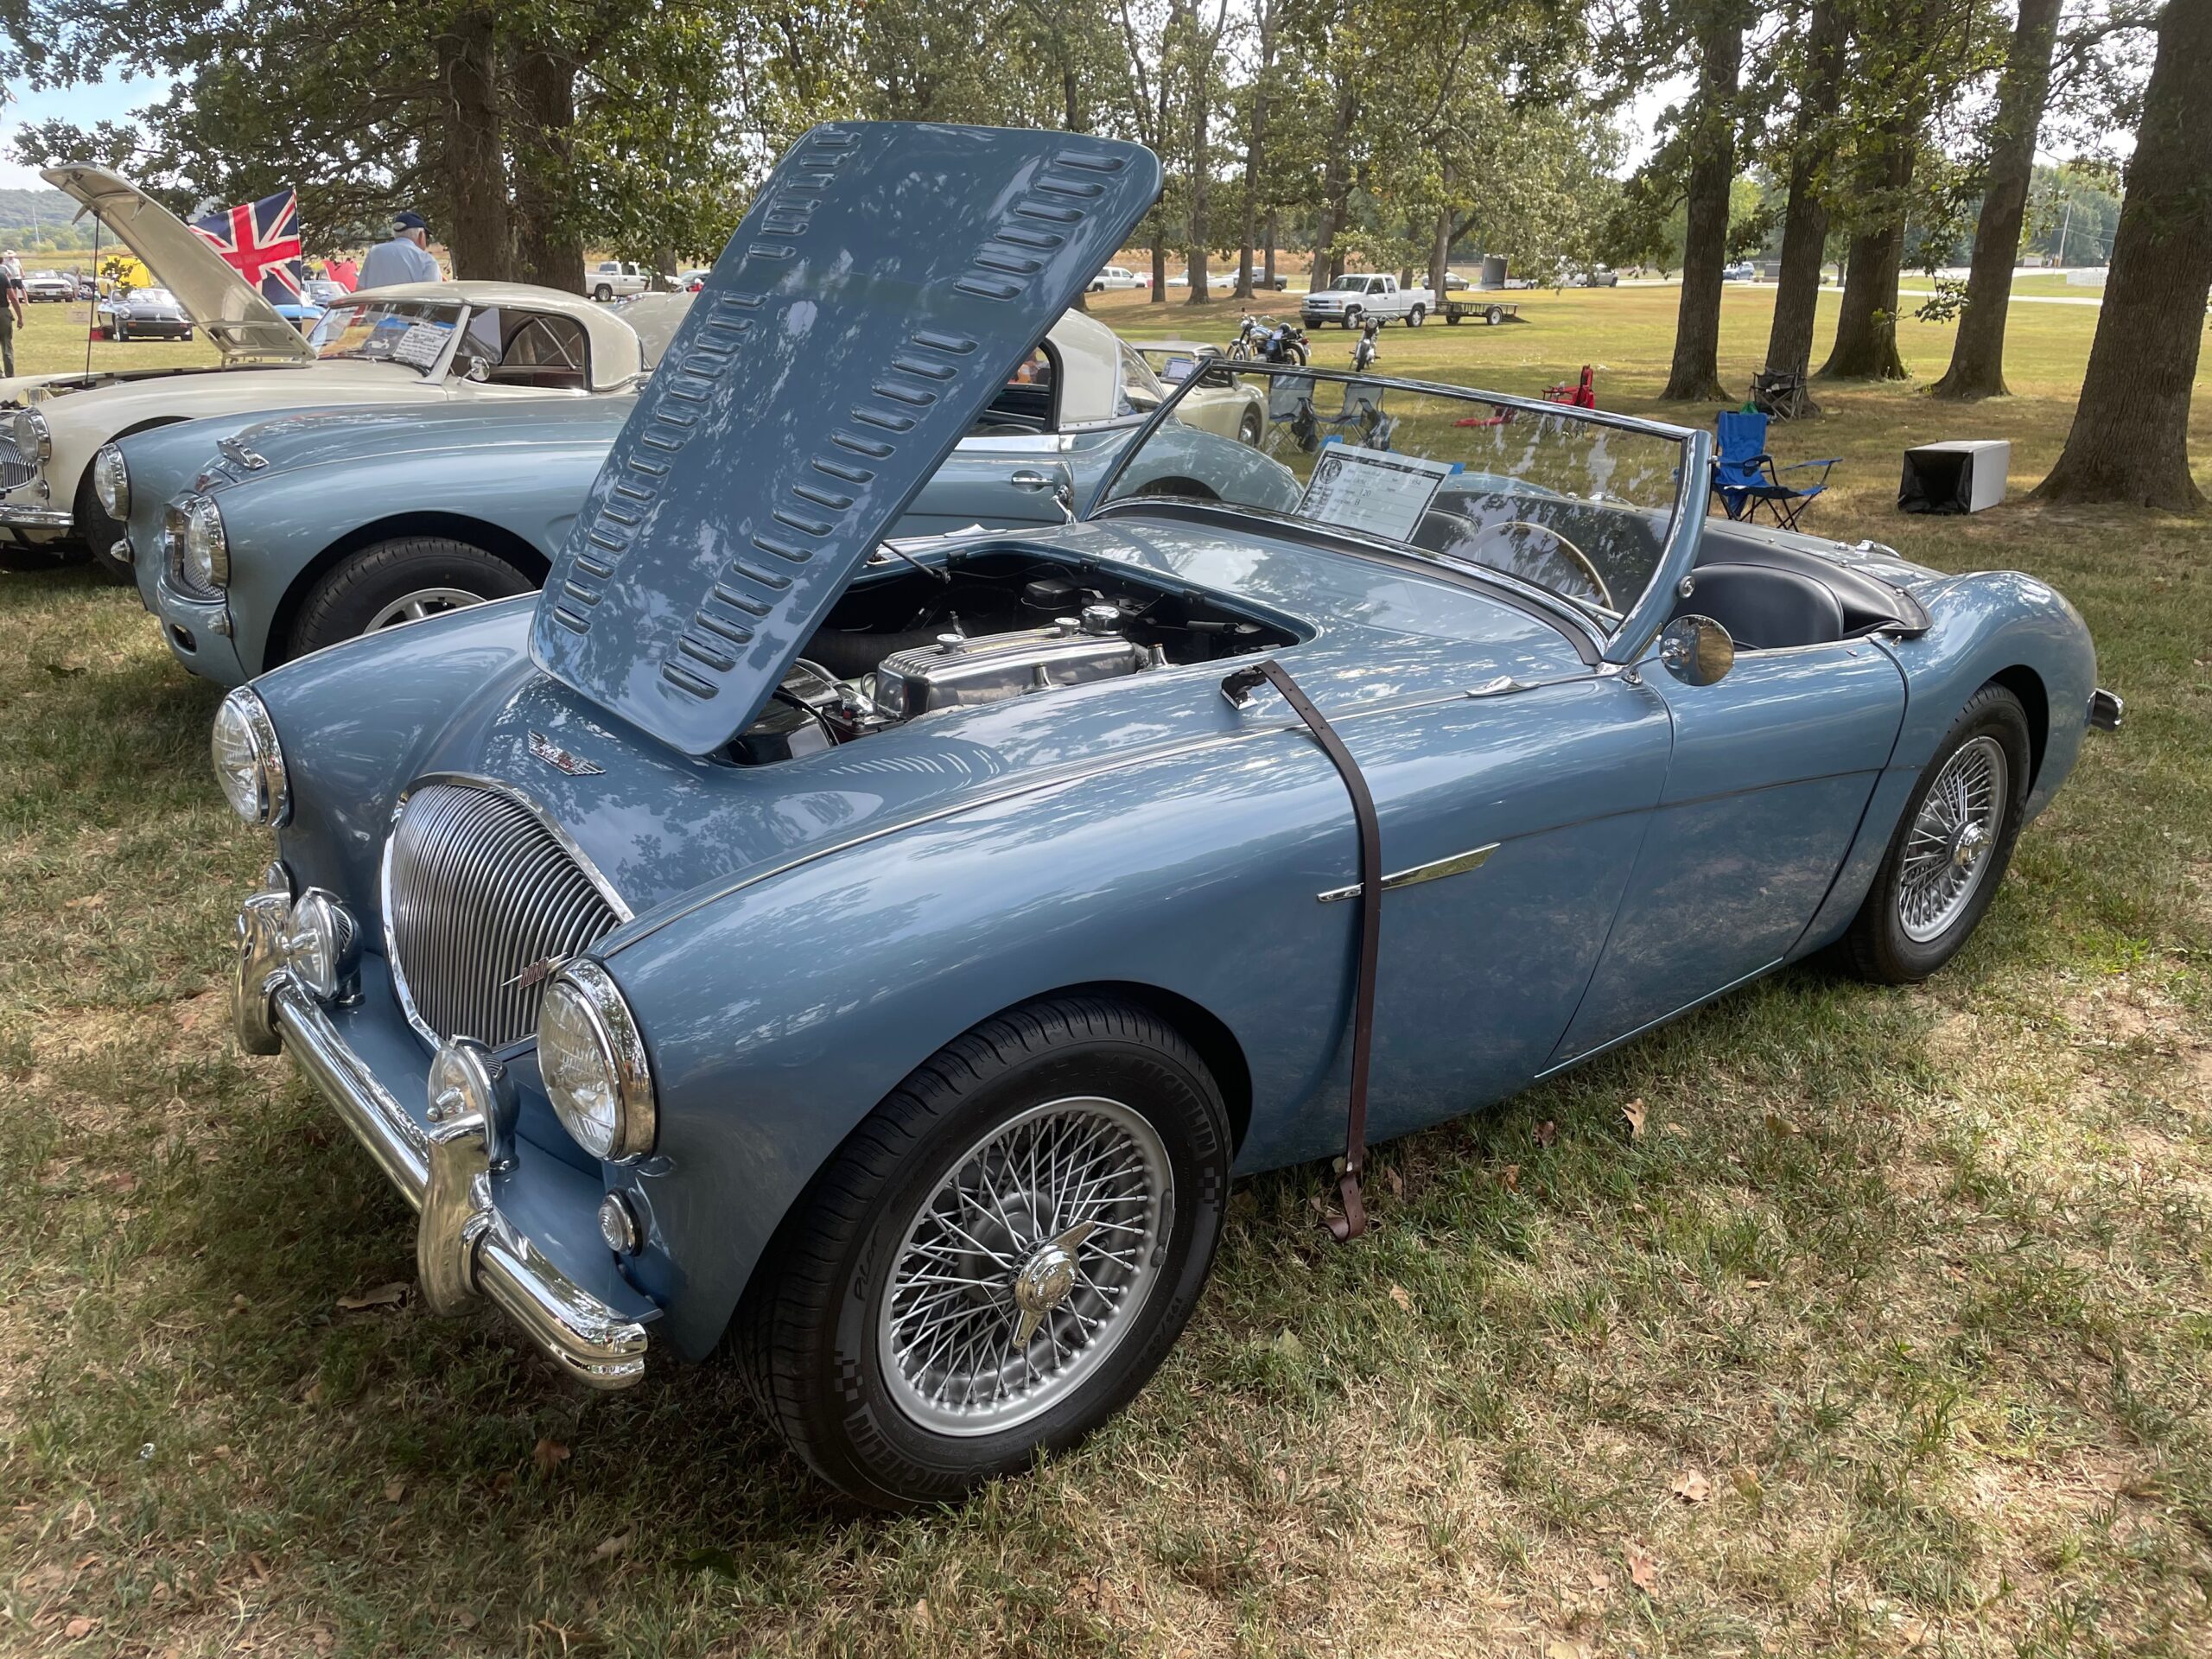 Beautiful Austin Healey. I never miss the Brits in the Ozarks British Car Show in Fayetteville every fall.